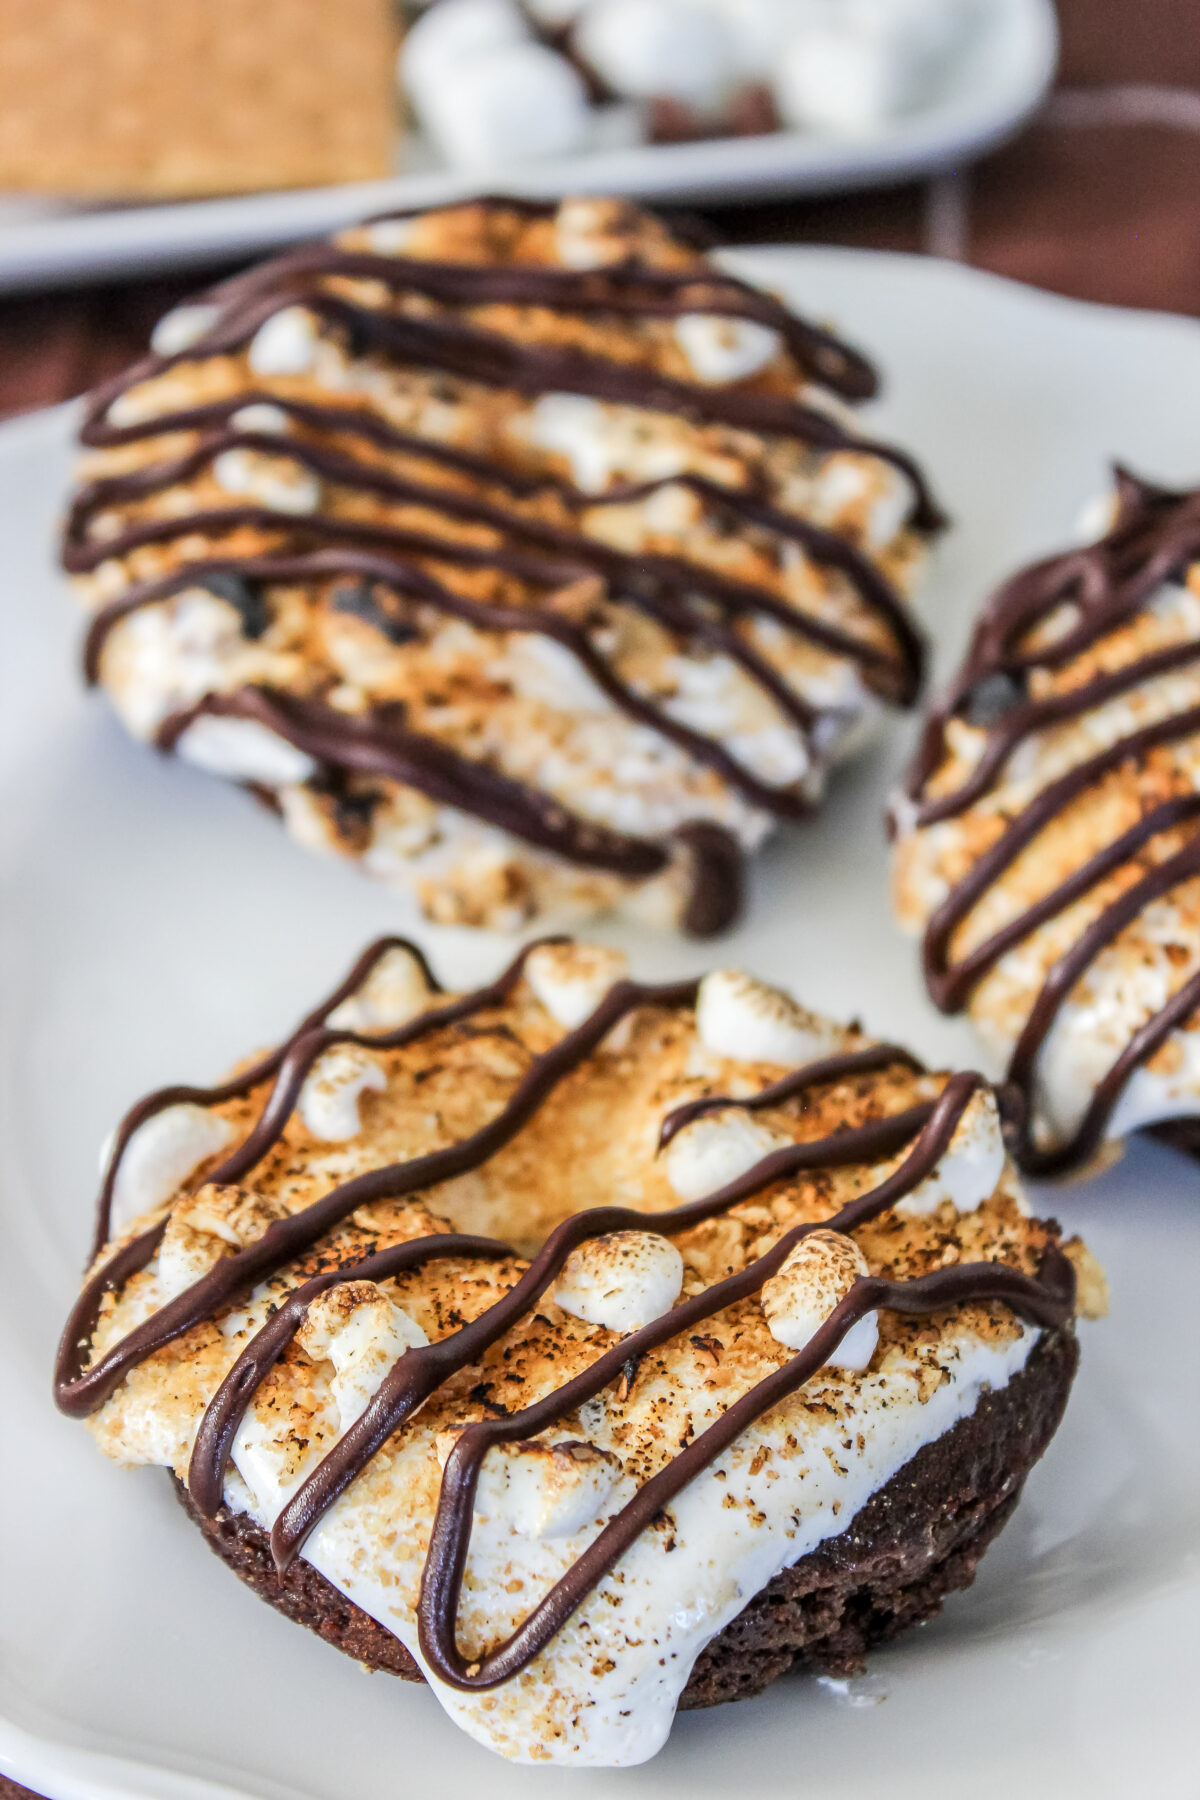 Who says you can't have s'mores in the middle of winter? This recipe for S'mores Chocolate Donuts is easy and full of chocolatey goodness.